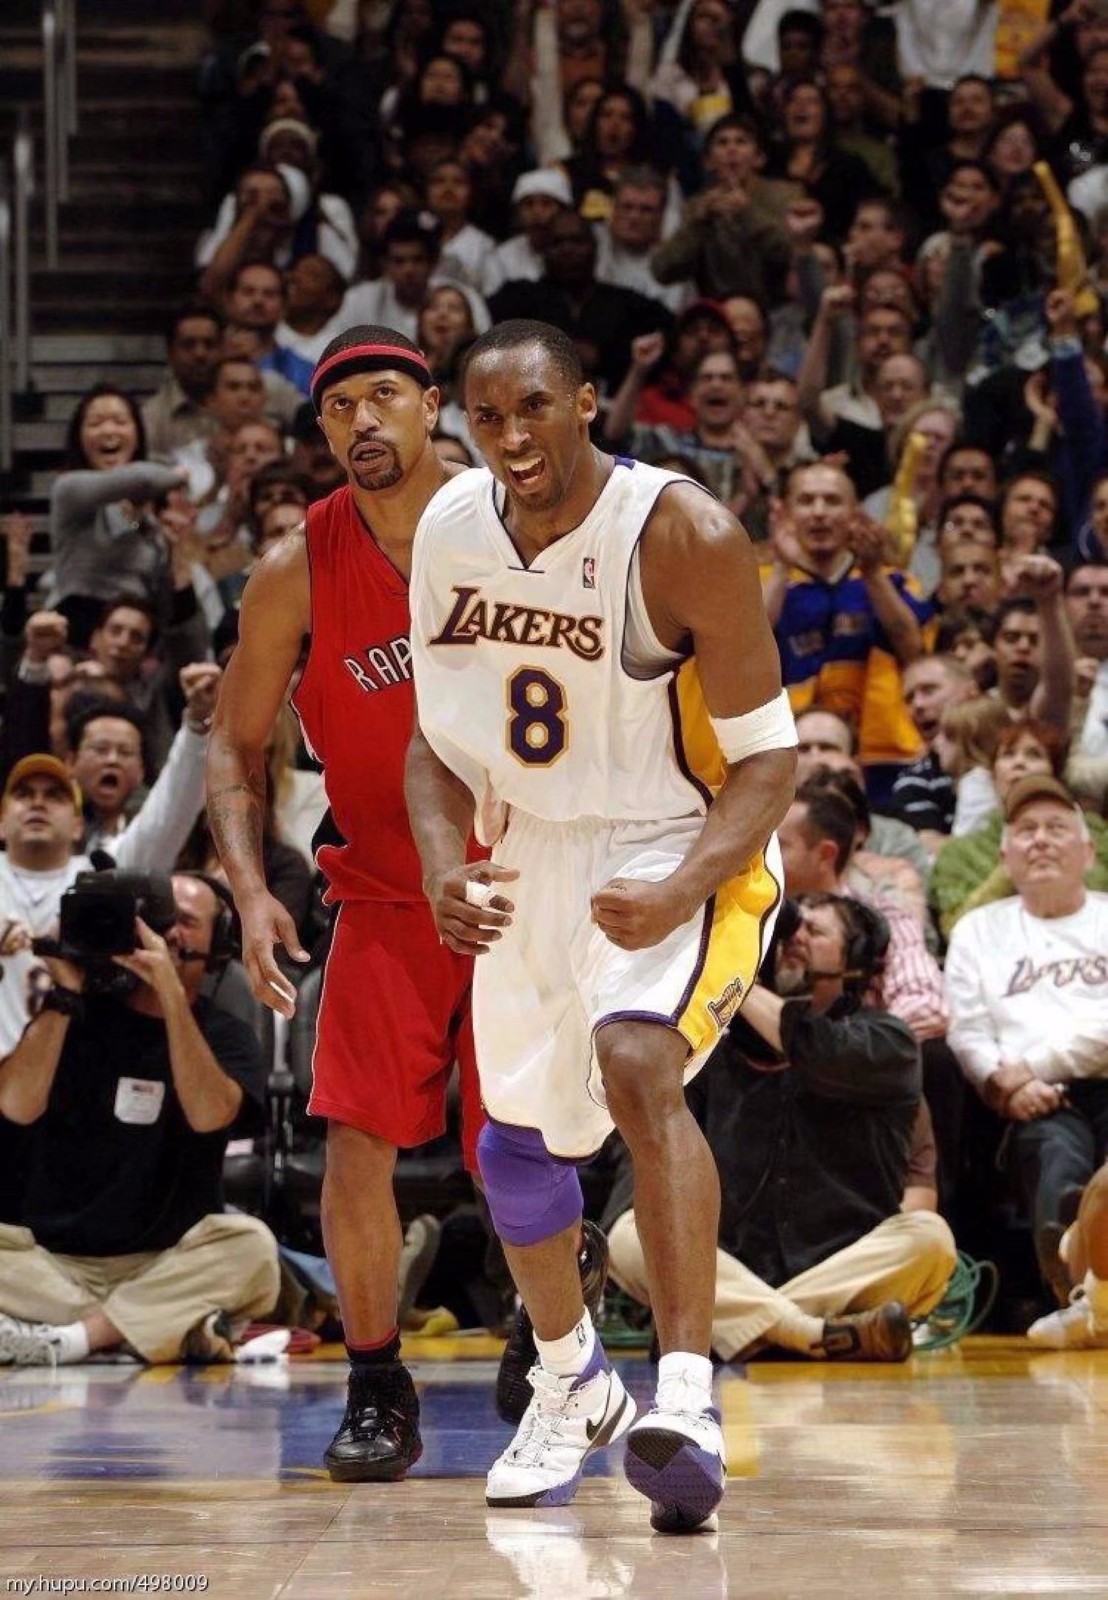 Kobe Bryant's 81-point game epitomised his approach to basketball